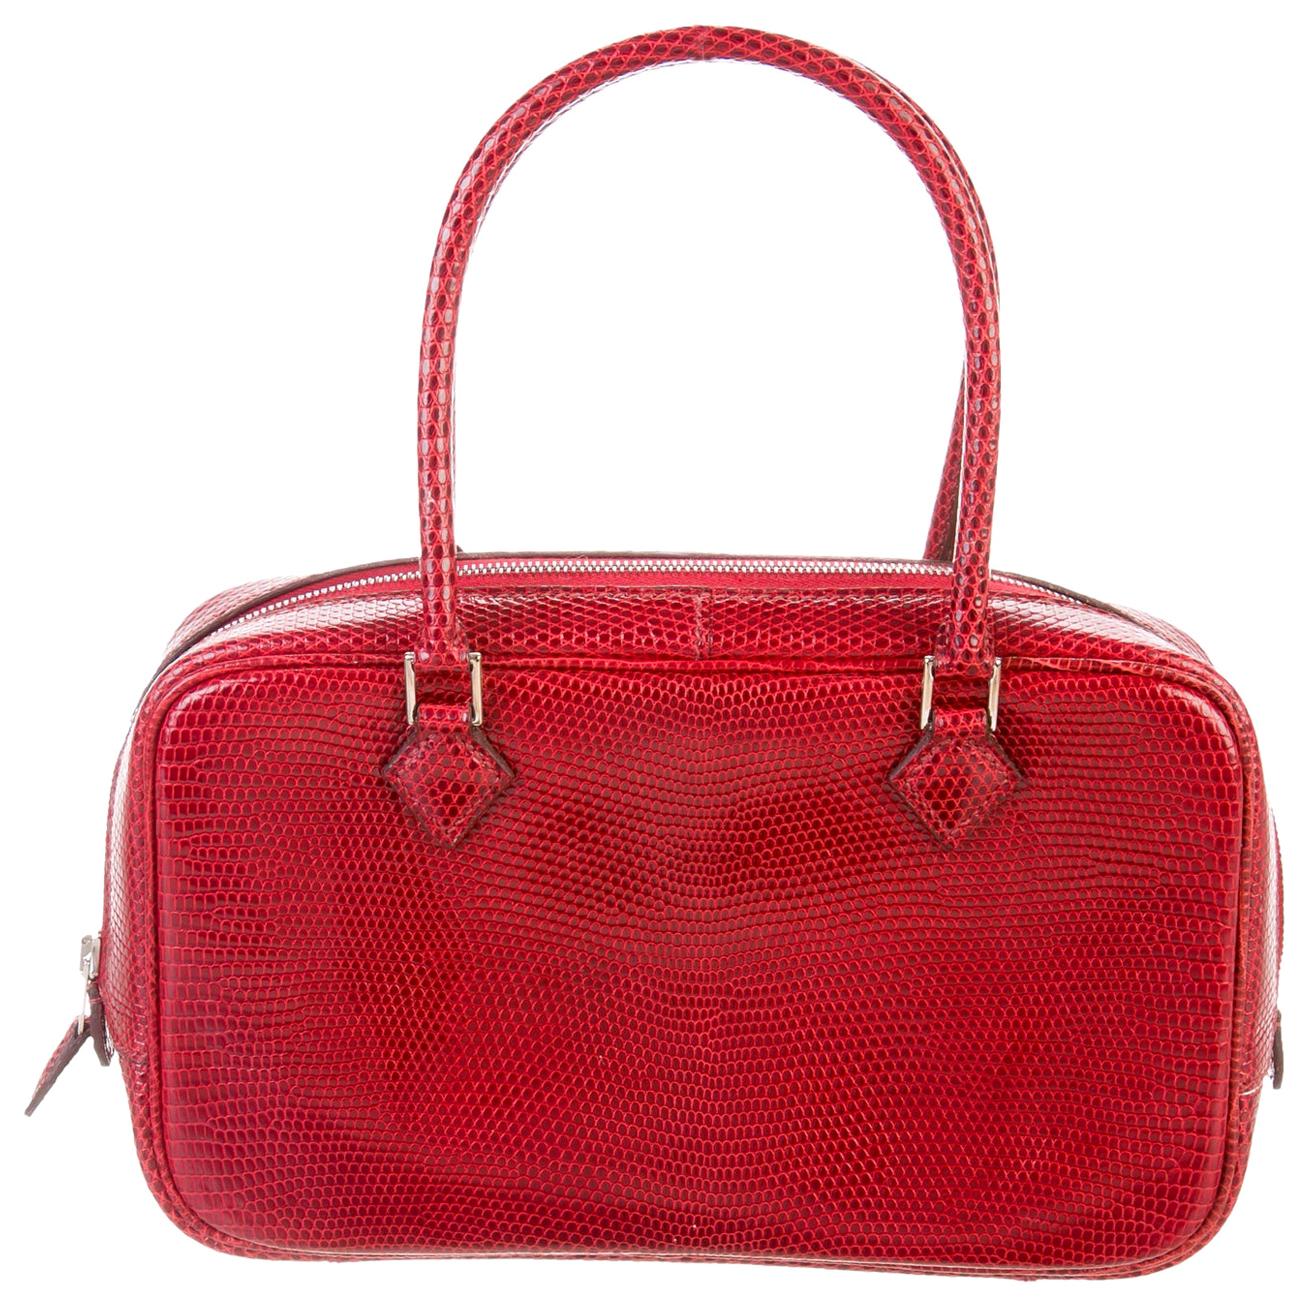 Hermes Red Lizard Exotic Leather Mini Plume Top Handle Evening Bag in Box